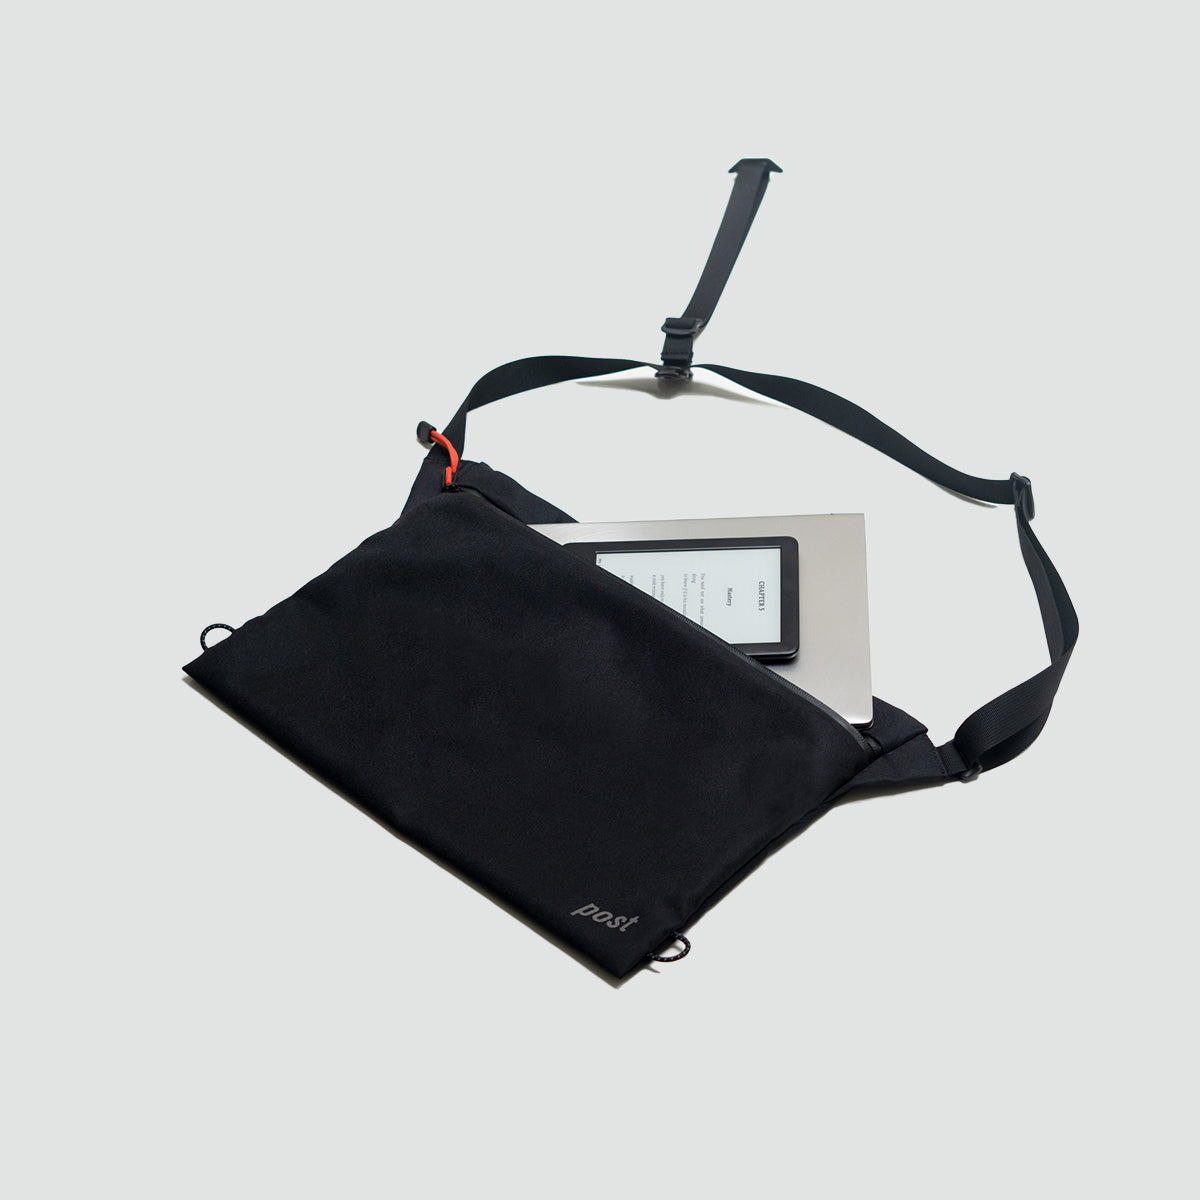 Musette – Post Carry Co.